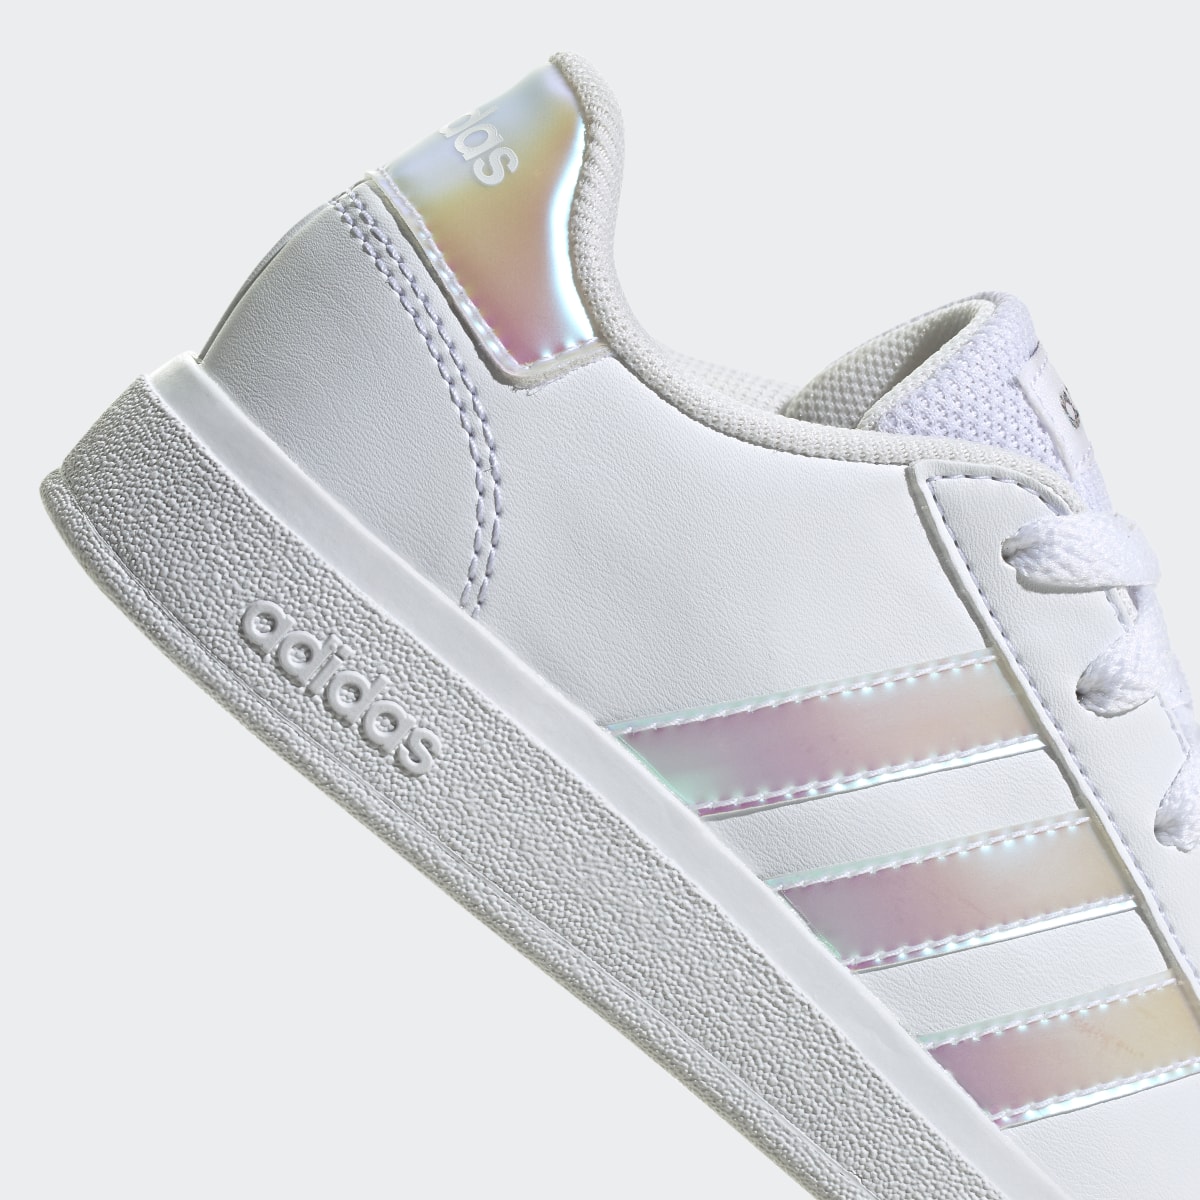 Adidas Grand Court 2.0 Shoes. 10